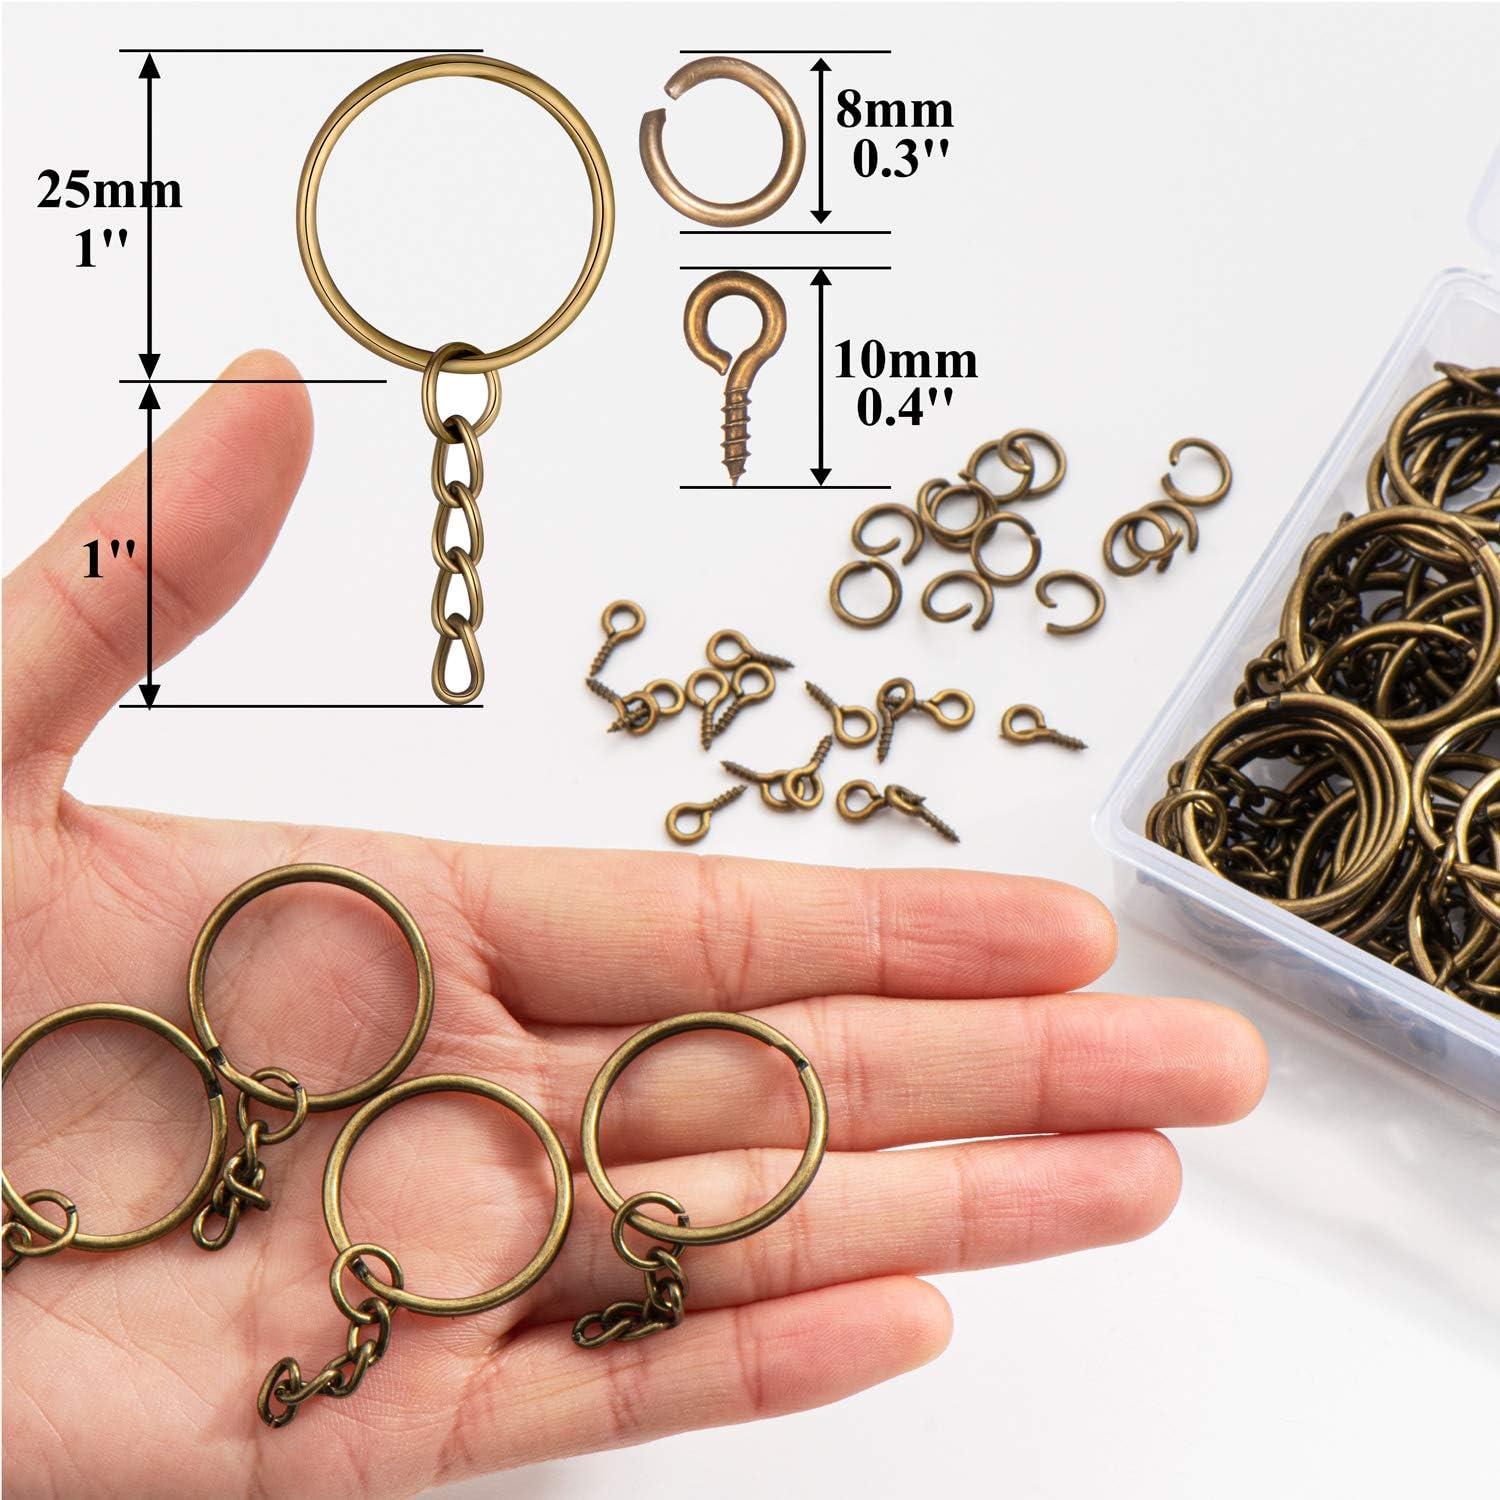 100Pcs Keychain Rings 1 Inch/25mm Silver Key Chain Rings with 100Pcs Jump  Rings and 100Pcs Screw Eye Pins Bulk for Crafts